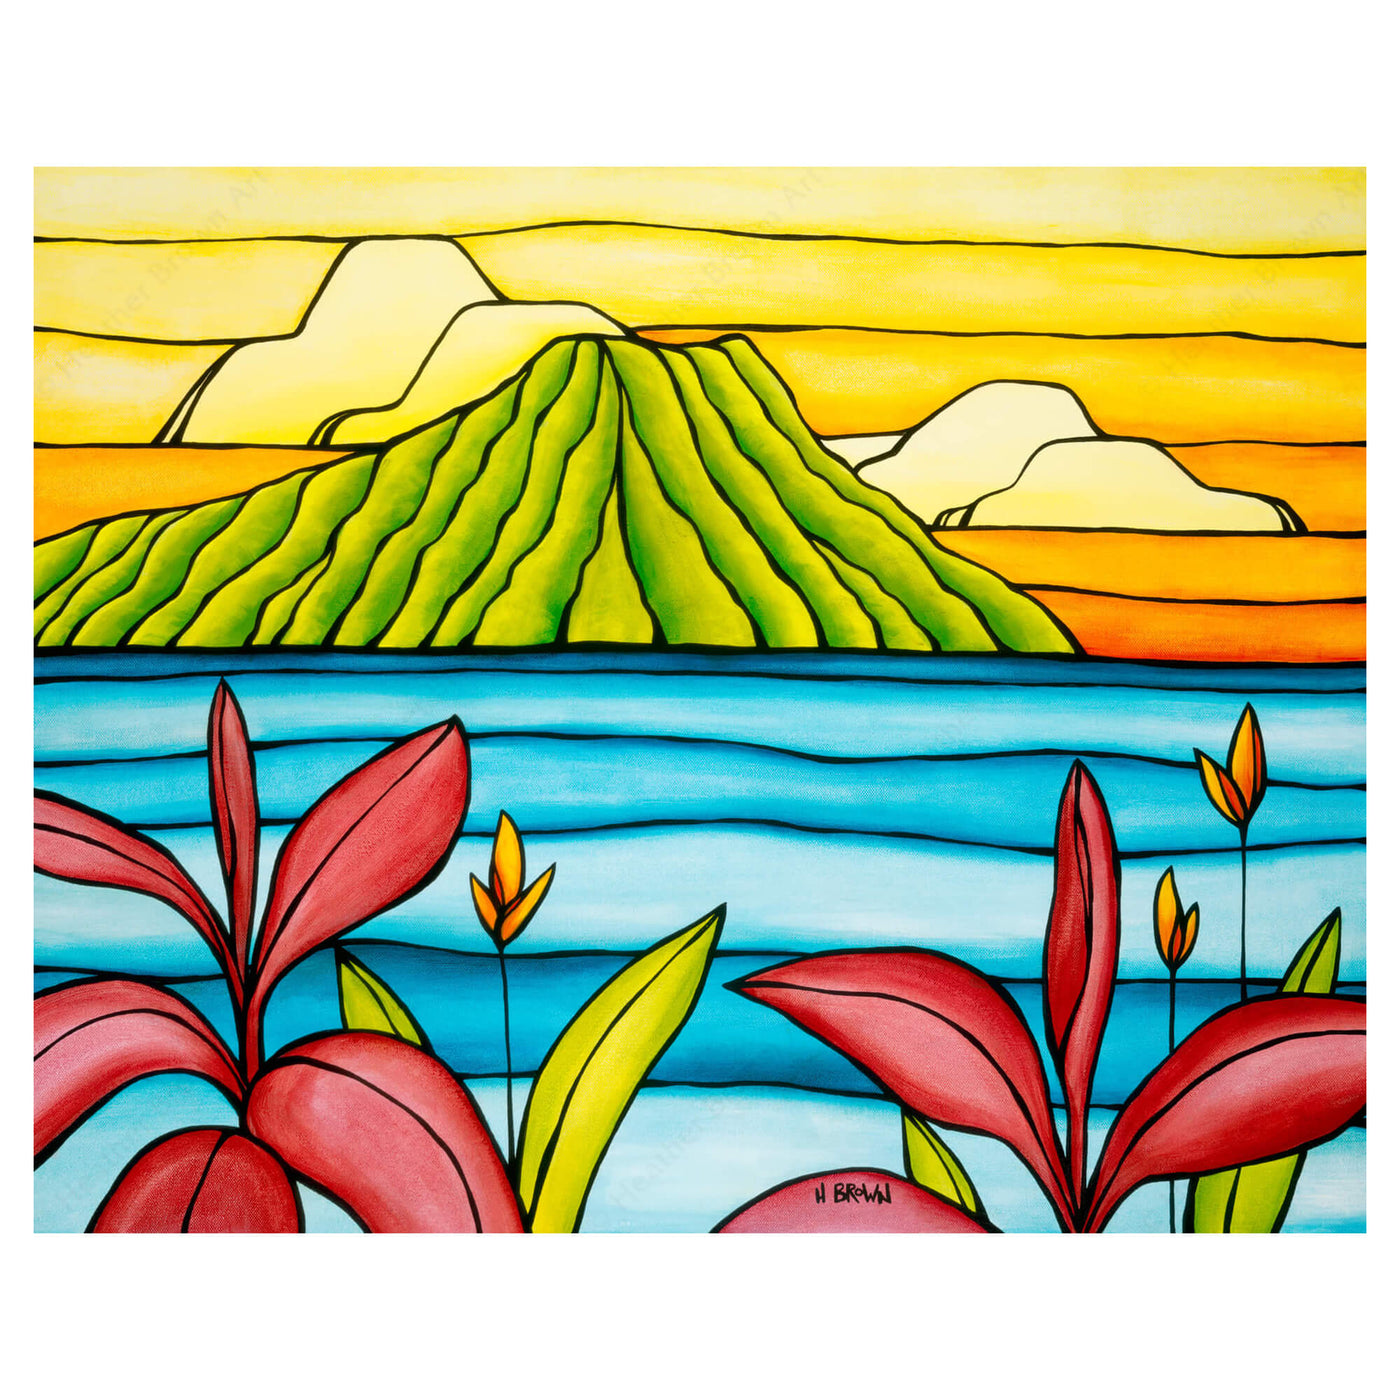 A matted art print featuring Diamond Head from a distance of calm waters framed by some beautiful tropical flowers by Hawaii surf artist Heather Brown